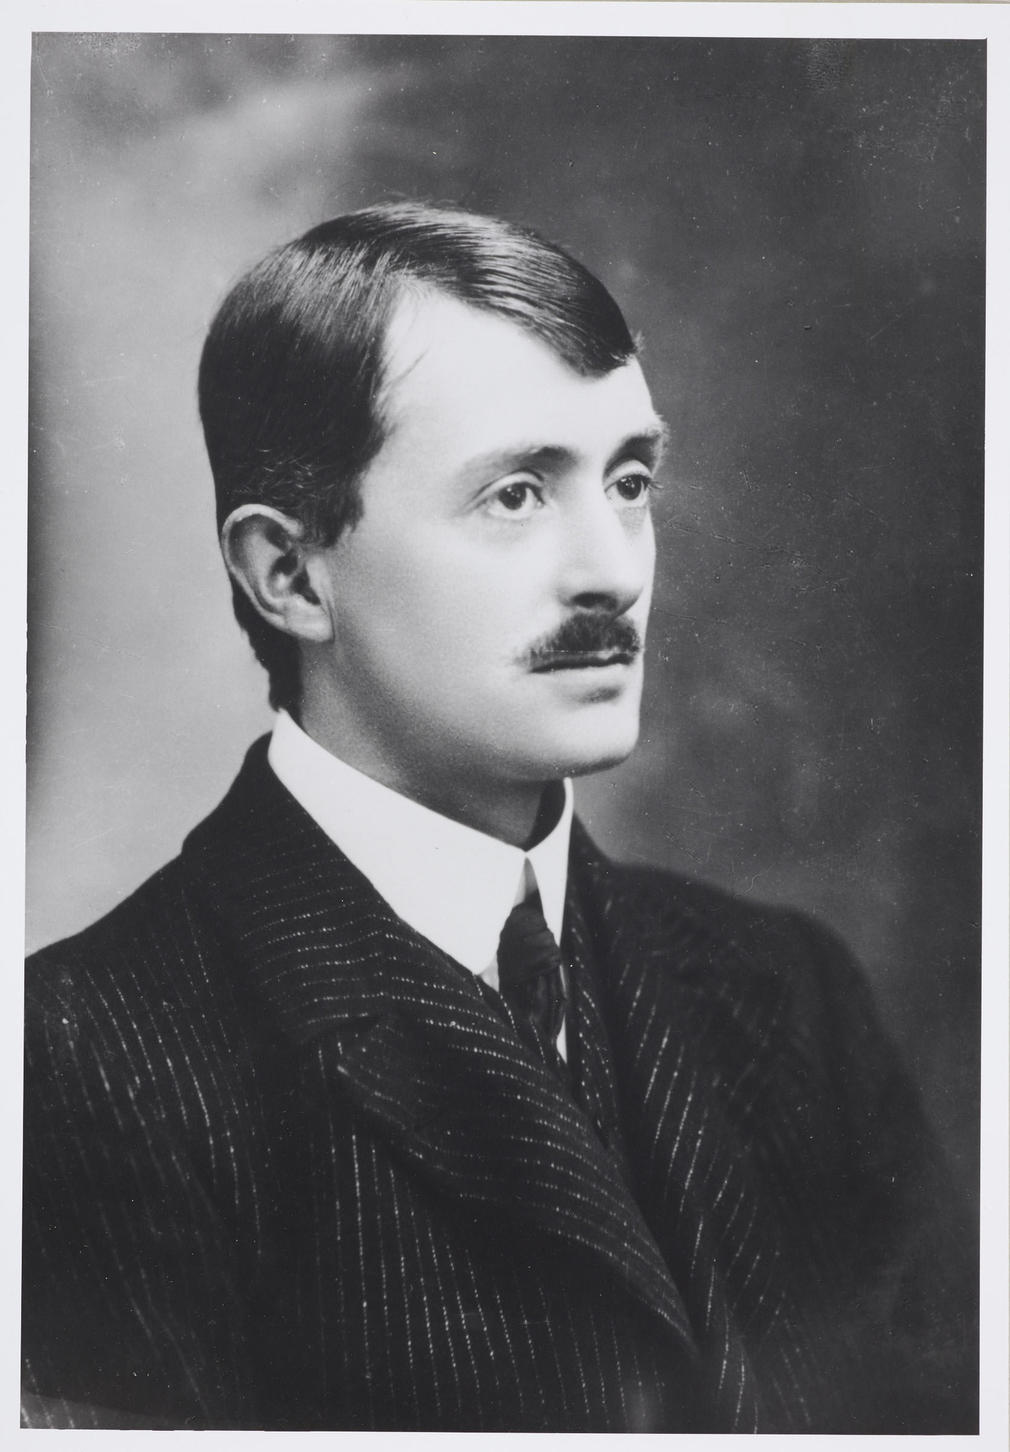 Photograph of a head and shoulders length portrait of the Poet Laureate and holder of the Order of Merit, John Masefield. He faces three-quarters right and wears a dark jacket, white shirt and tie.